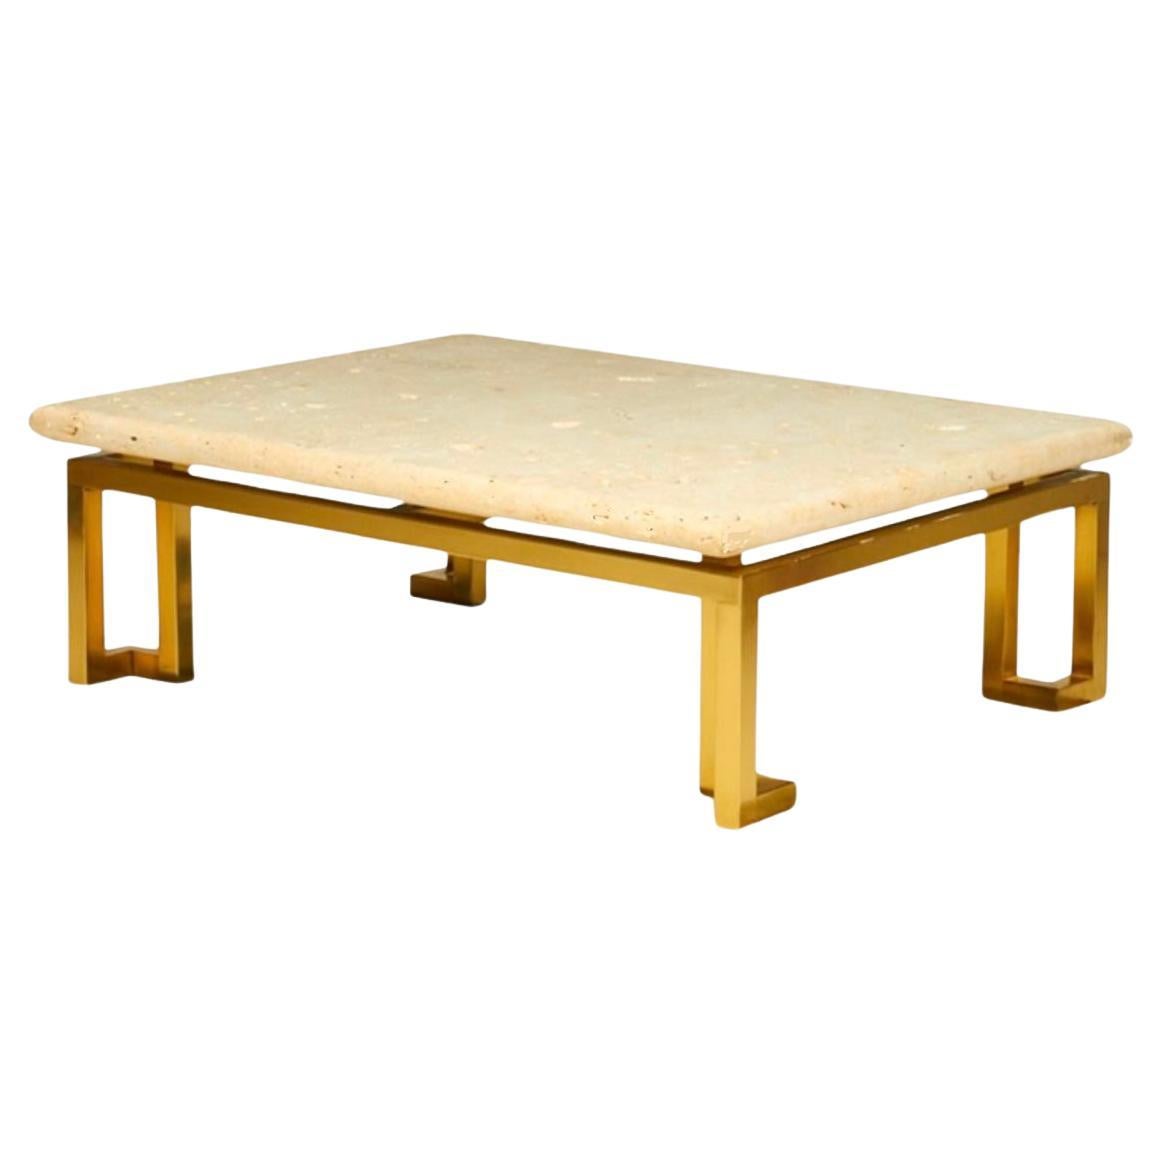 Luten, Clary & Stern, Inc Mid Century Modern Fossil Stone & Brass Cocktail Table For Sale